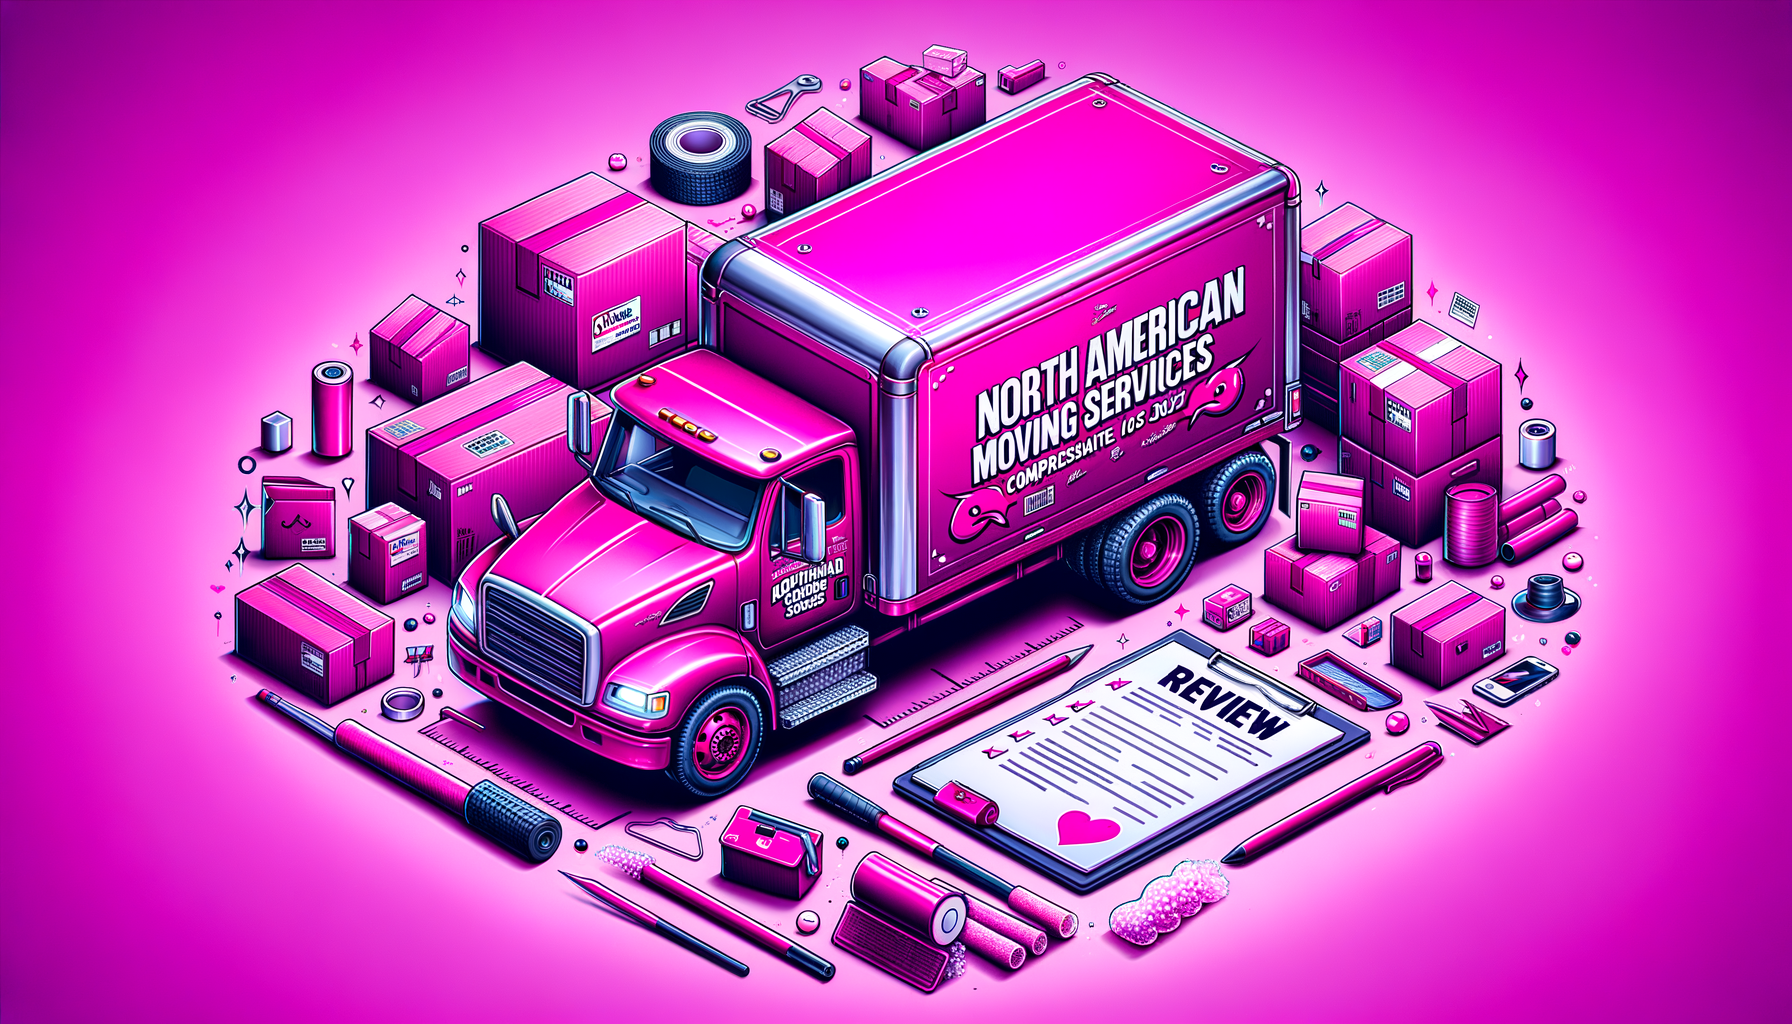 Fuchsia cartoon moving truck with "North American Moving Services 2024" logo, illustrating a comprehensive review scene.